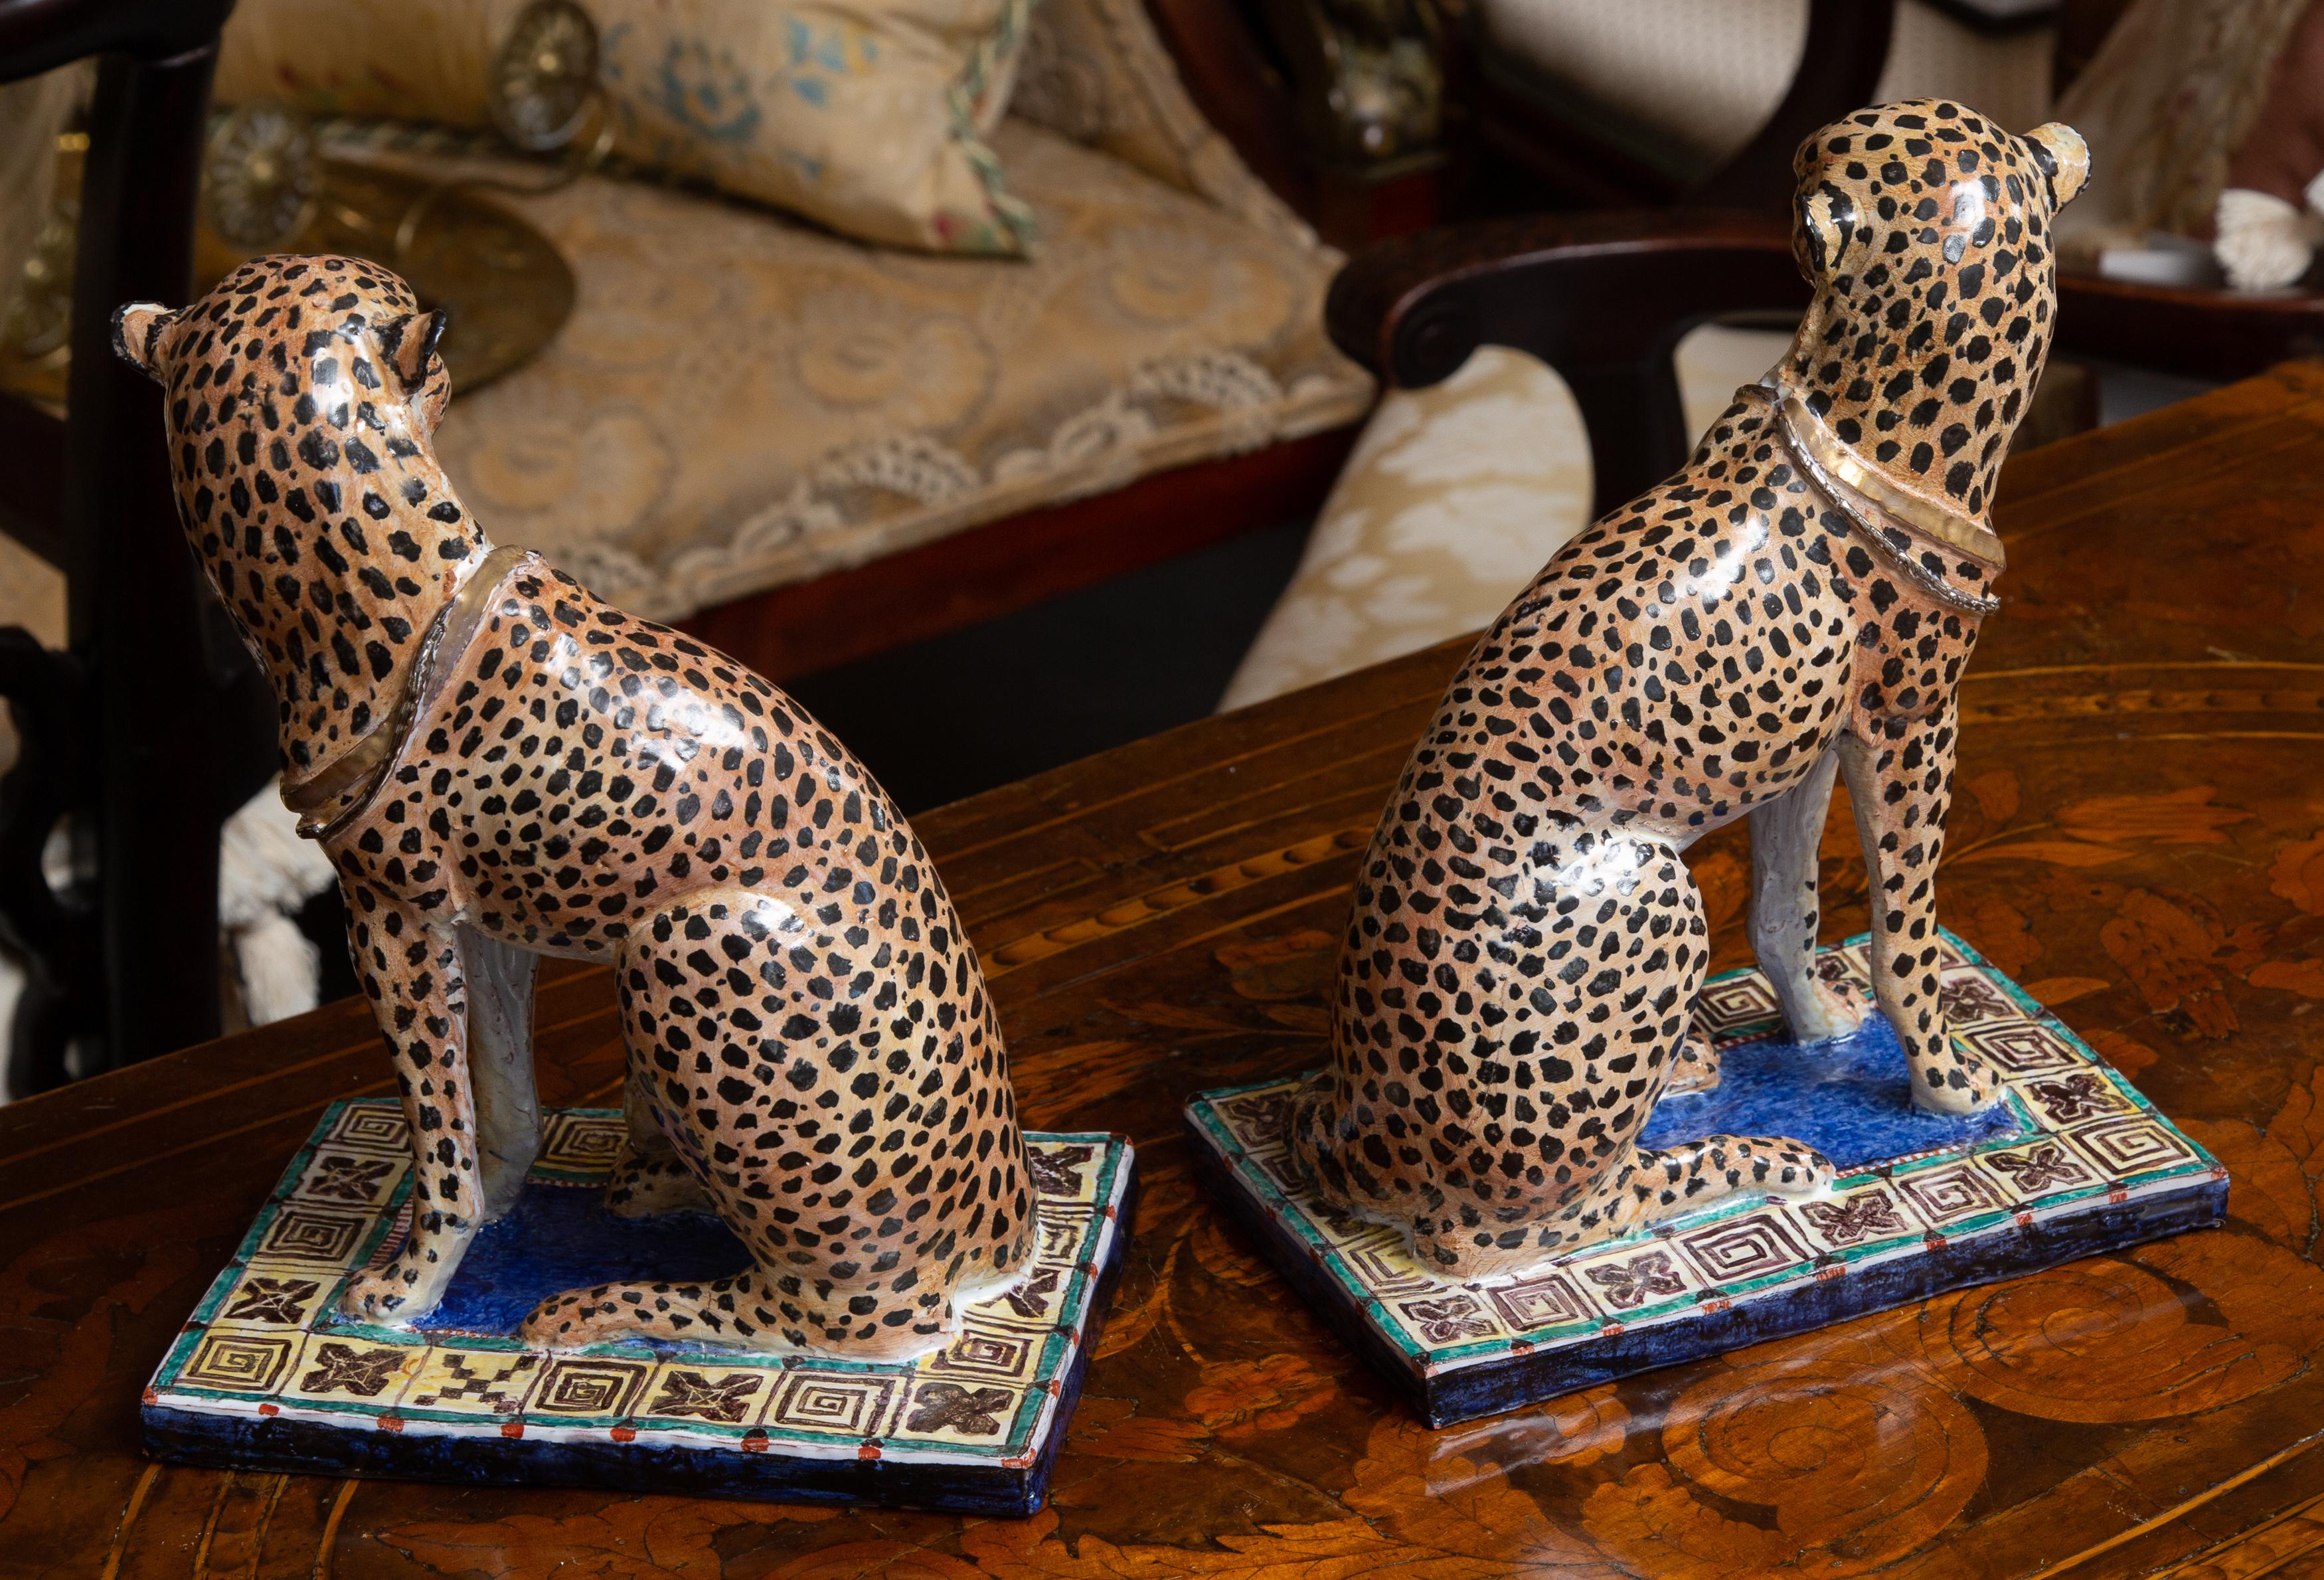 This is a beautifully crafted pair of mirror-image hand-painted terracotta cheetahs, situated on a colorful base, 20th century.